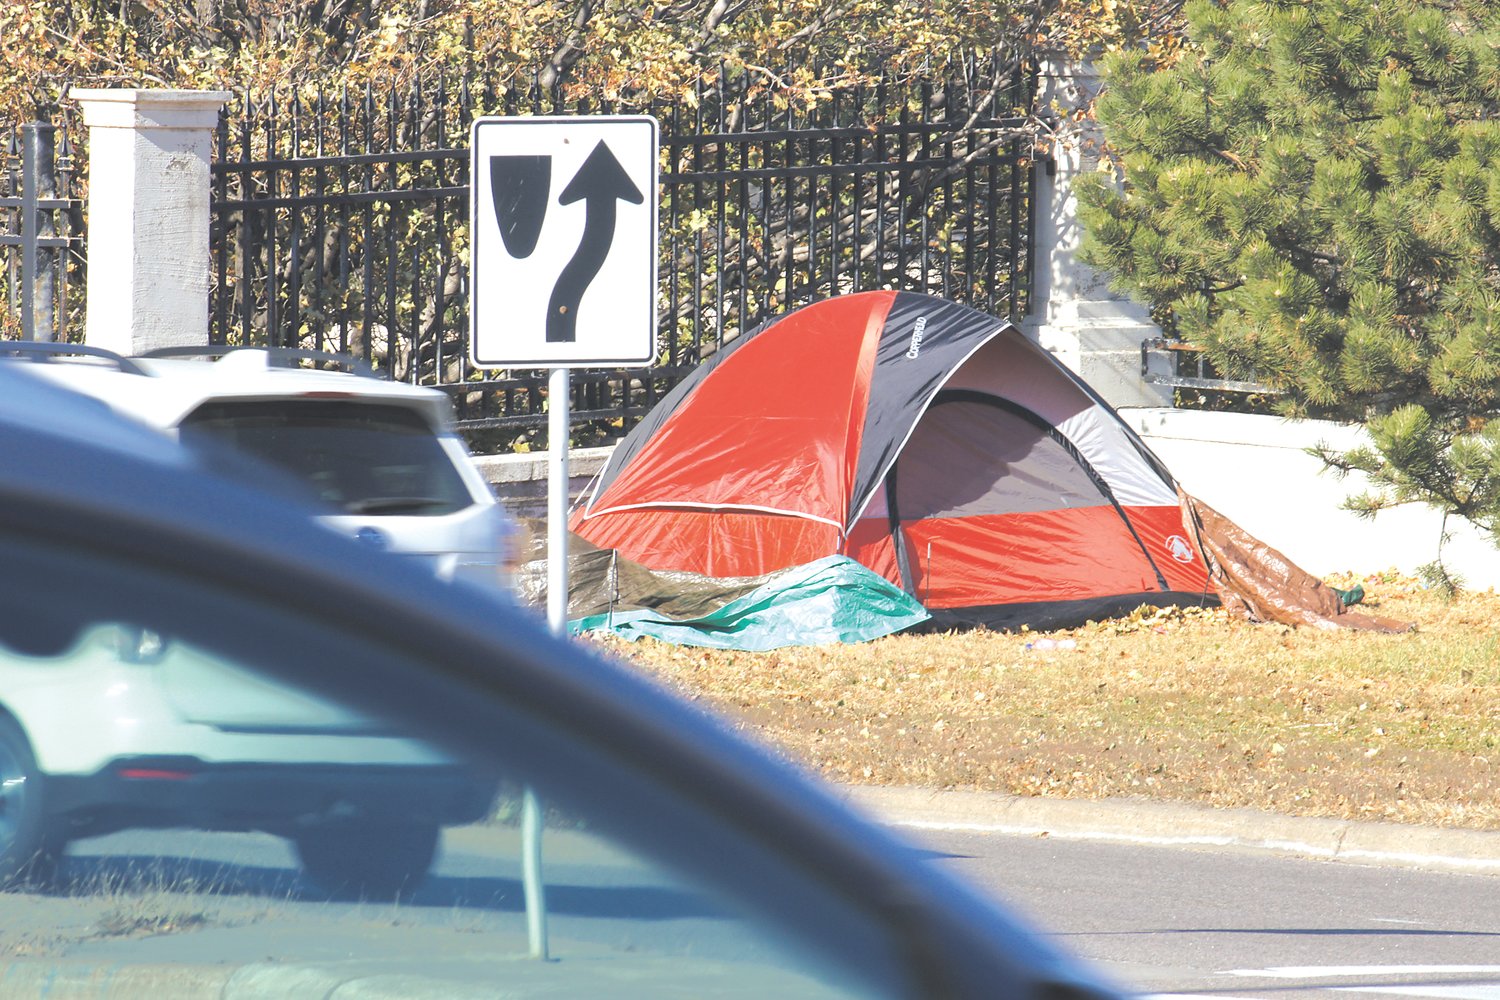 Tents are set up at various places in St. Paul, including by John Ireland Blvd. and Kellogg (above) and near a wooded park (at right). Homelessness is prevalant throughout the state. According to Minnesota Homeless Coalition (MHC) Executive Director Rhonda Otteson, 80 out of 87 counties lack enough shelter beds. Half of the people experiencing homelessness are youth up to age 24. People of Color are 10 times more likely than their White counterparts to be homeless. (Photos by Terry Faust)